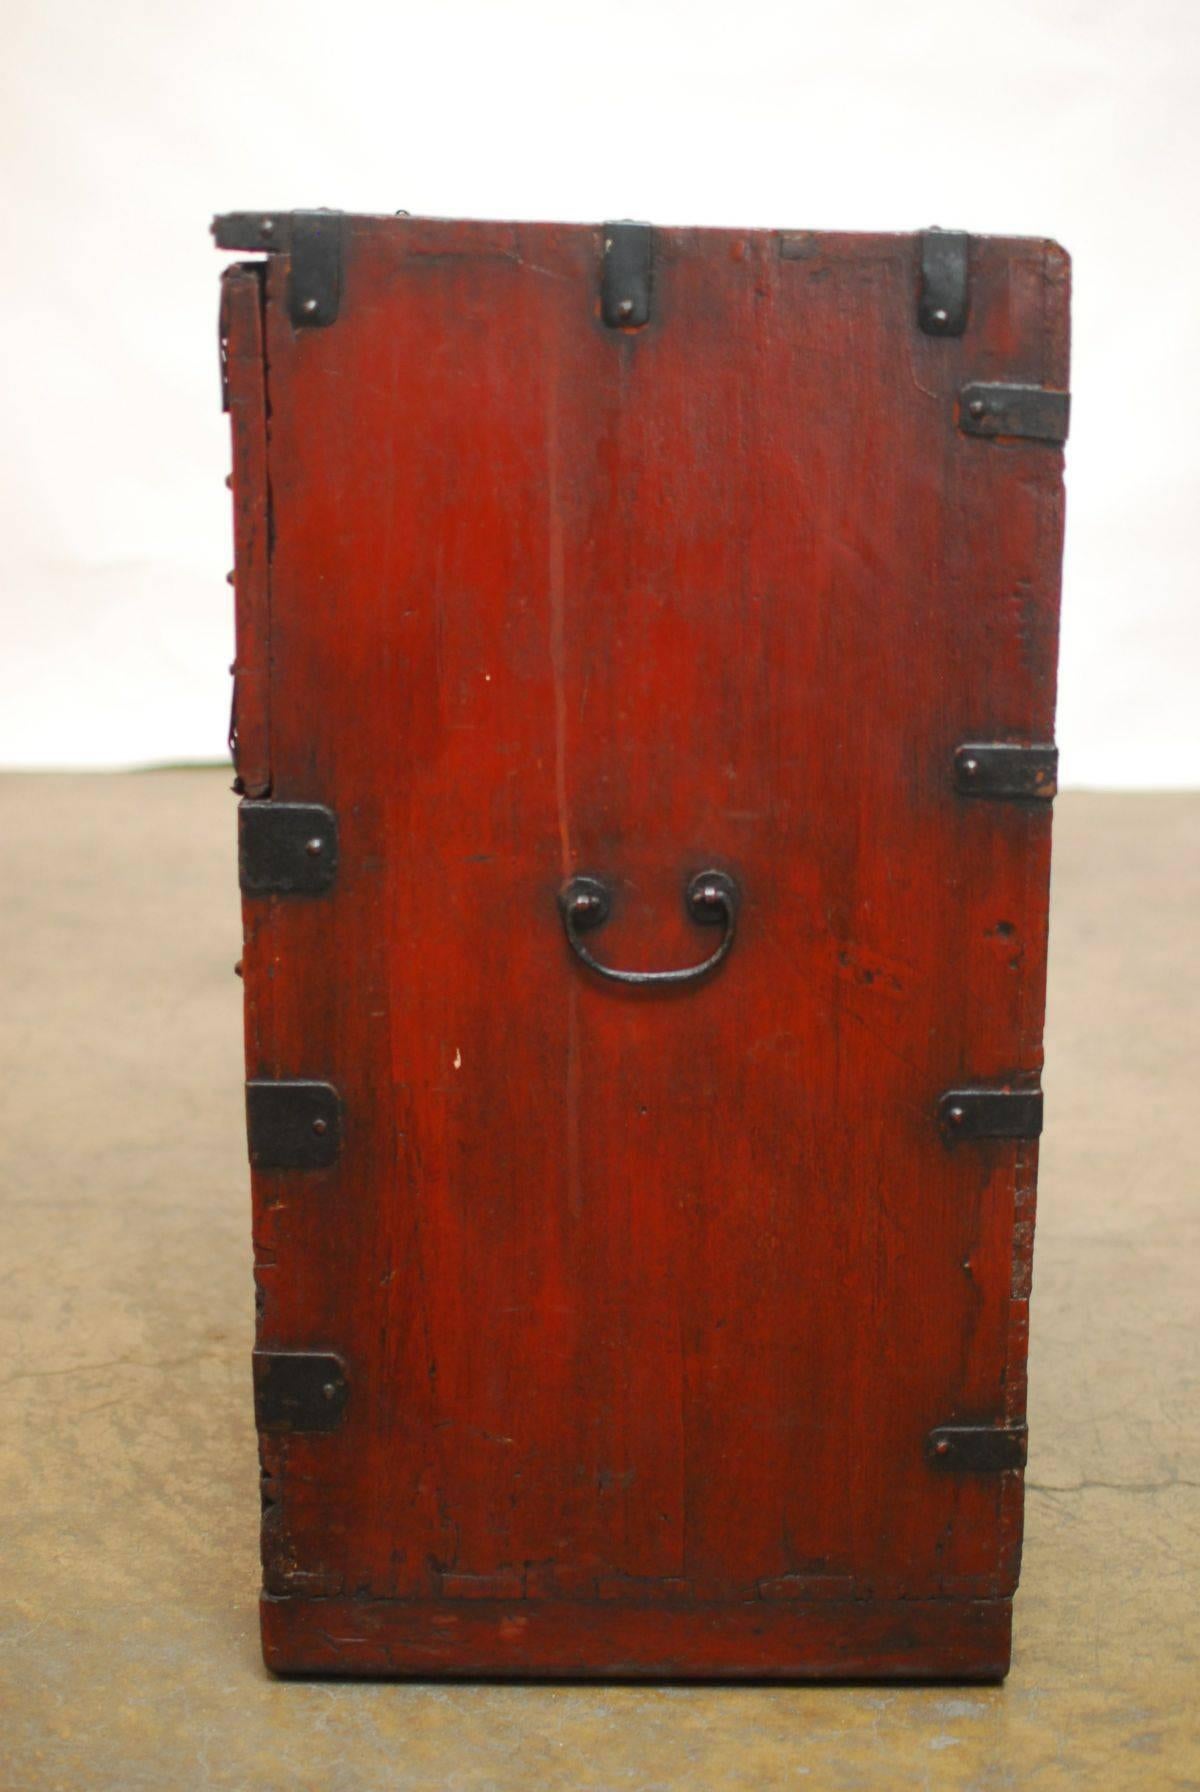 19th century Bandaji chest made in the Kyonggi province featuring a heavily decorated case with wrought iron pierced grill work and iron handles. This rare blanket chest is similar to a Japanese Tansu chest and is finished in a reddish brown lacquer